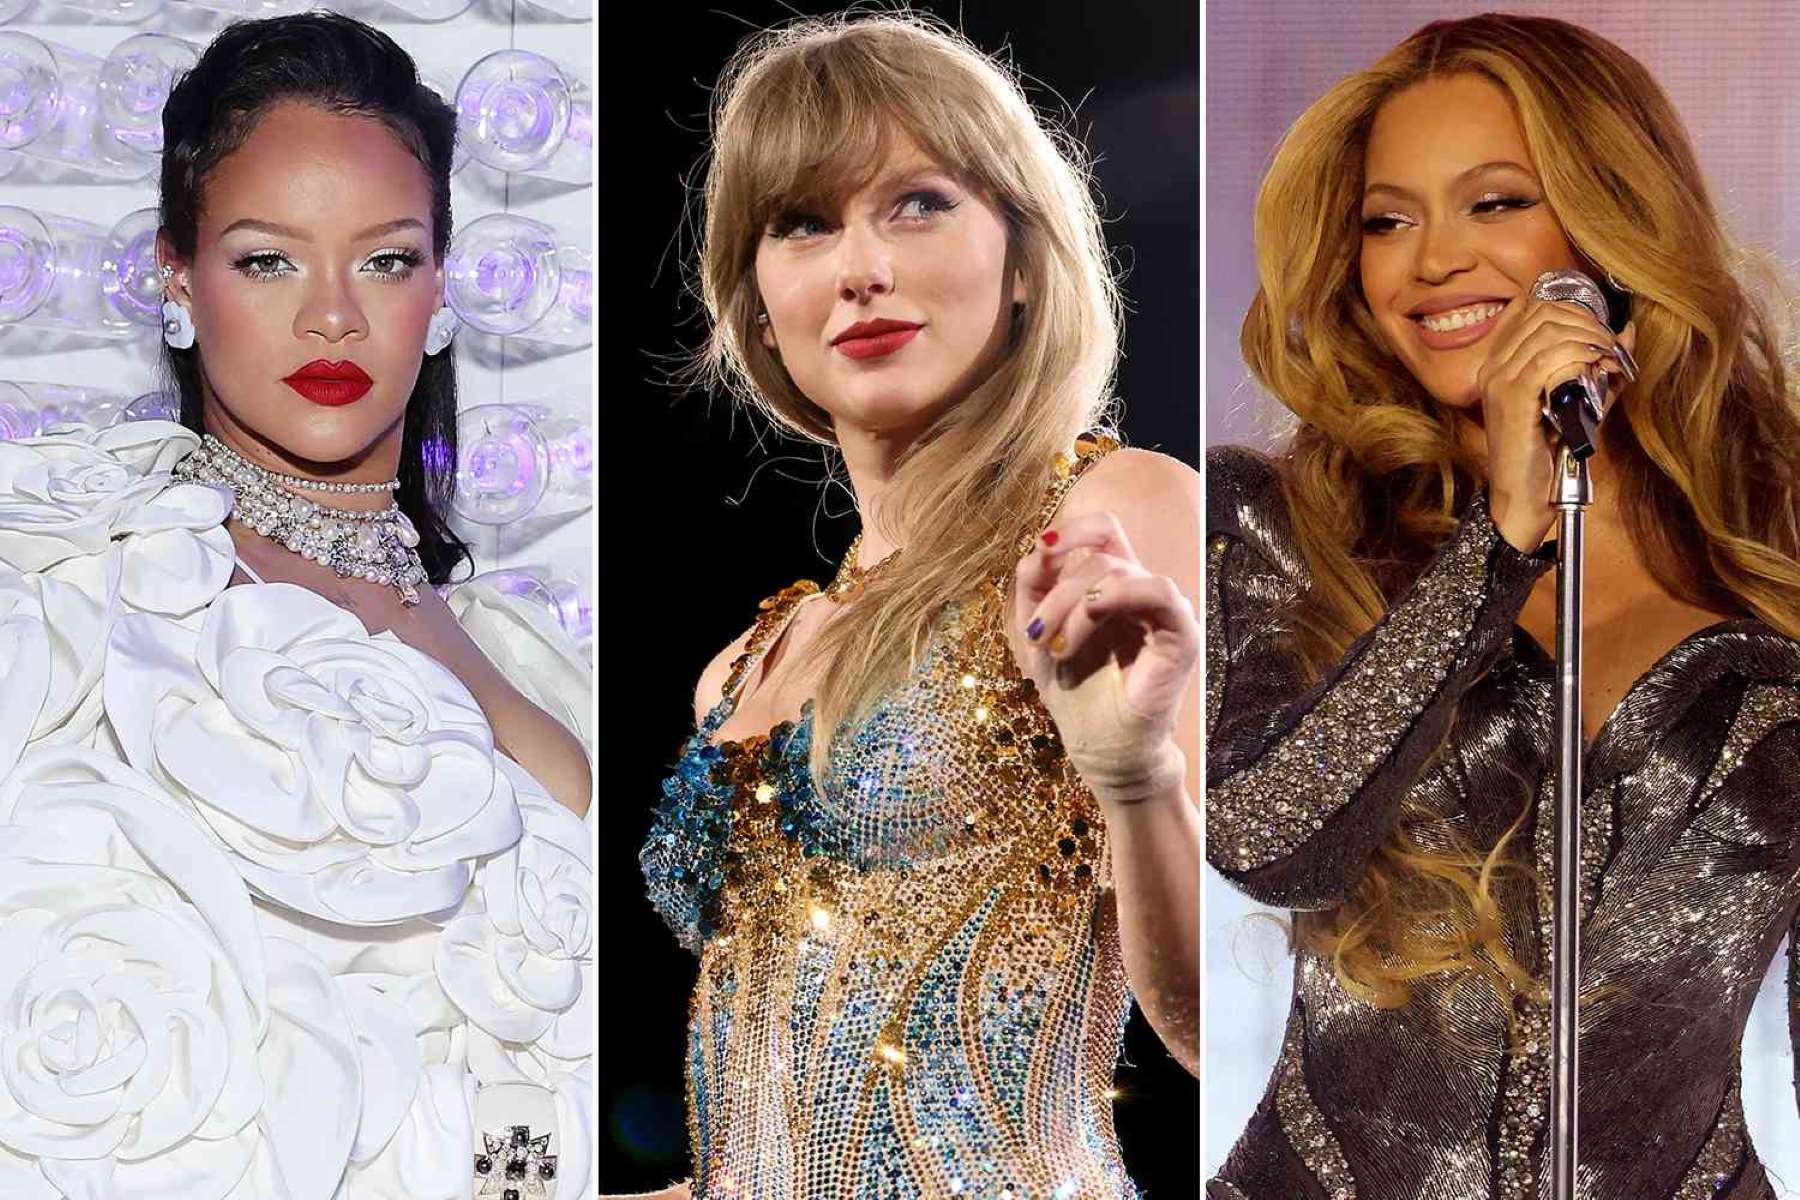 Who Is The Richest Female Musician